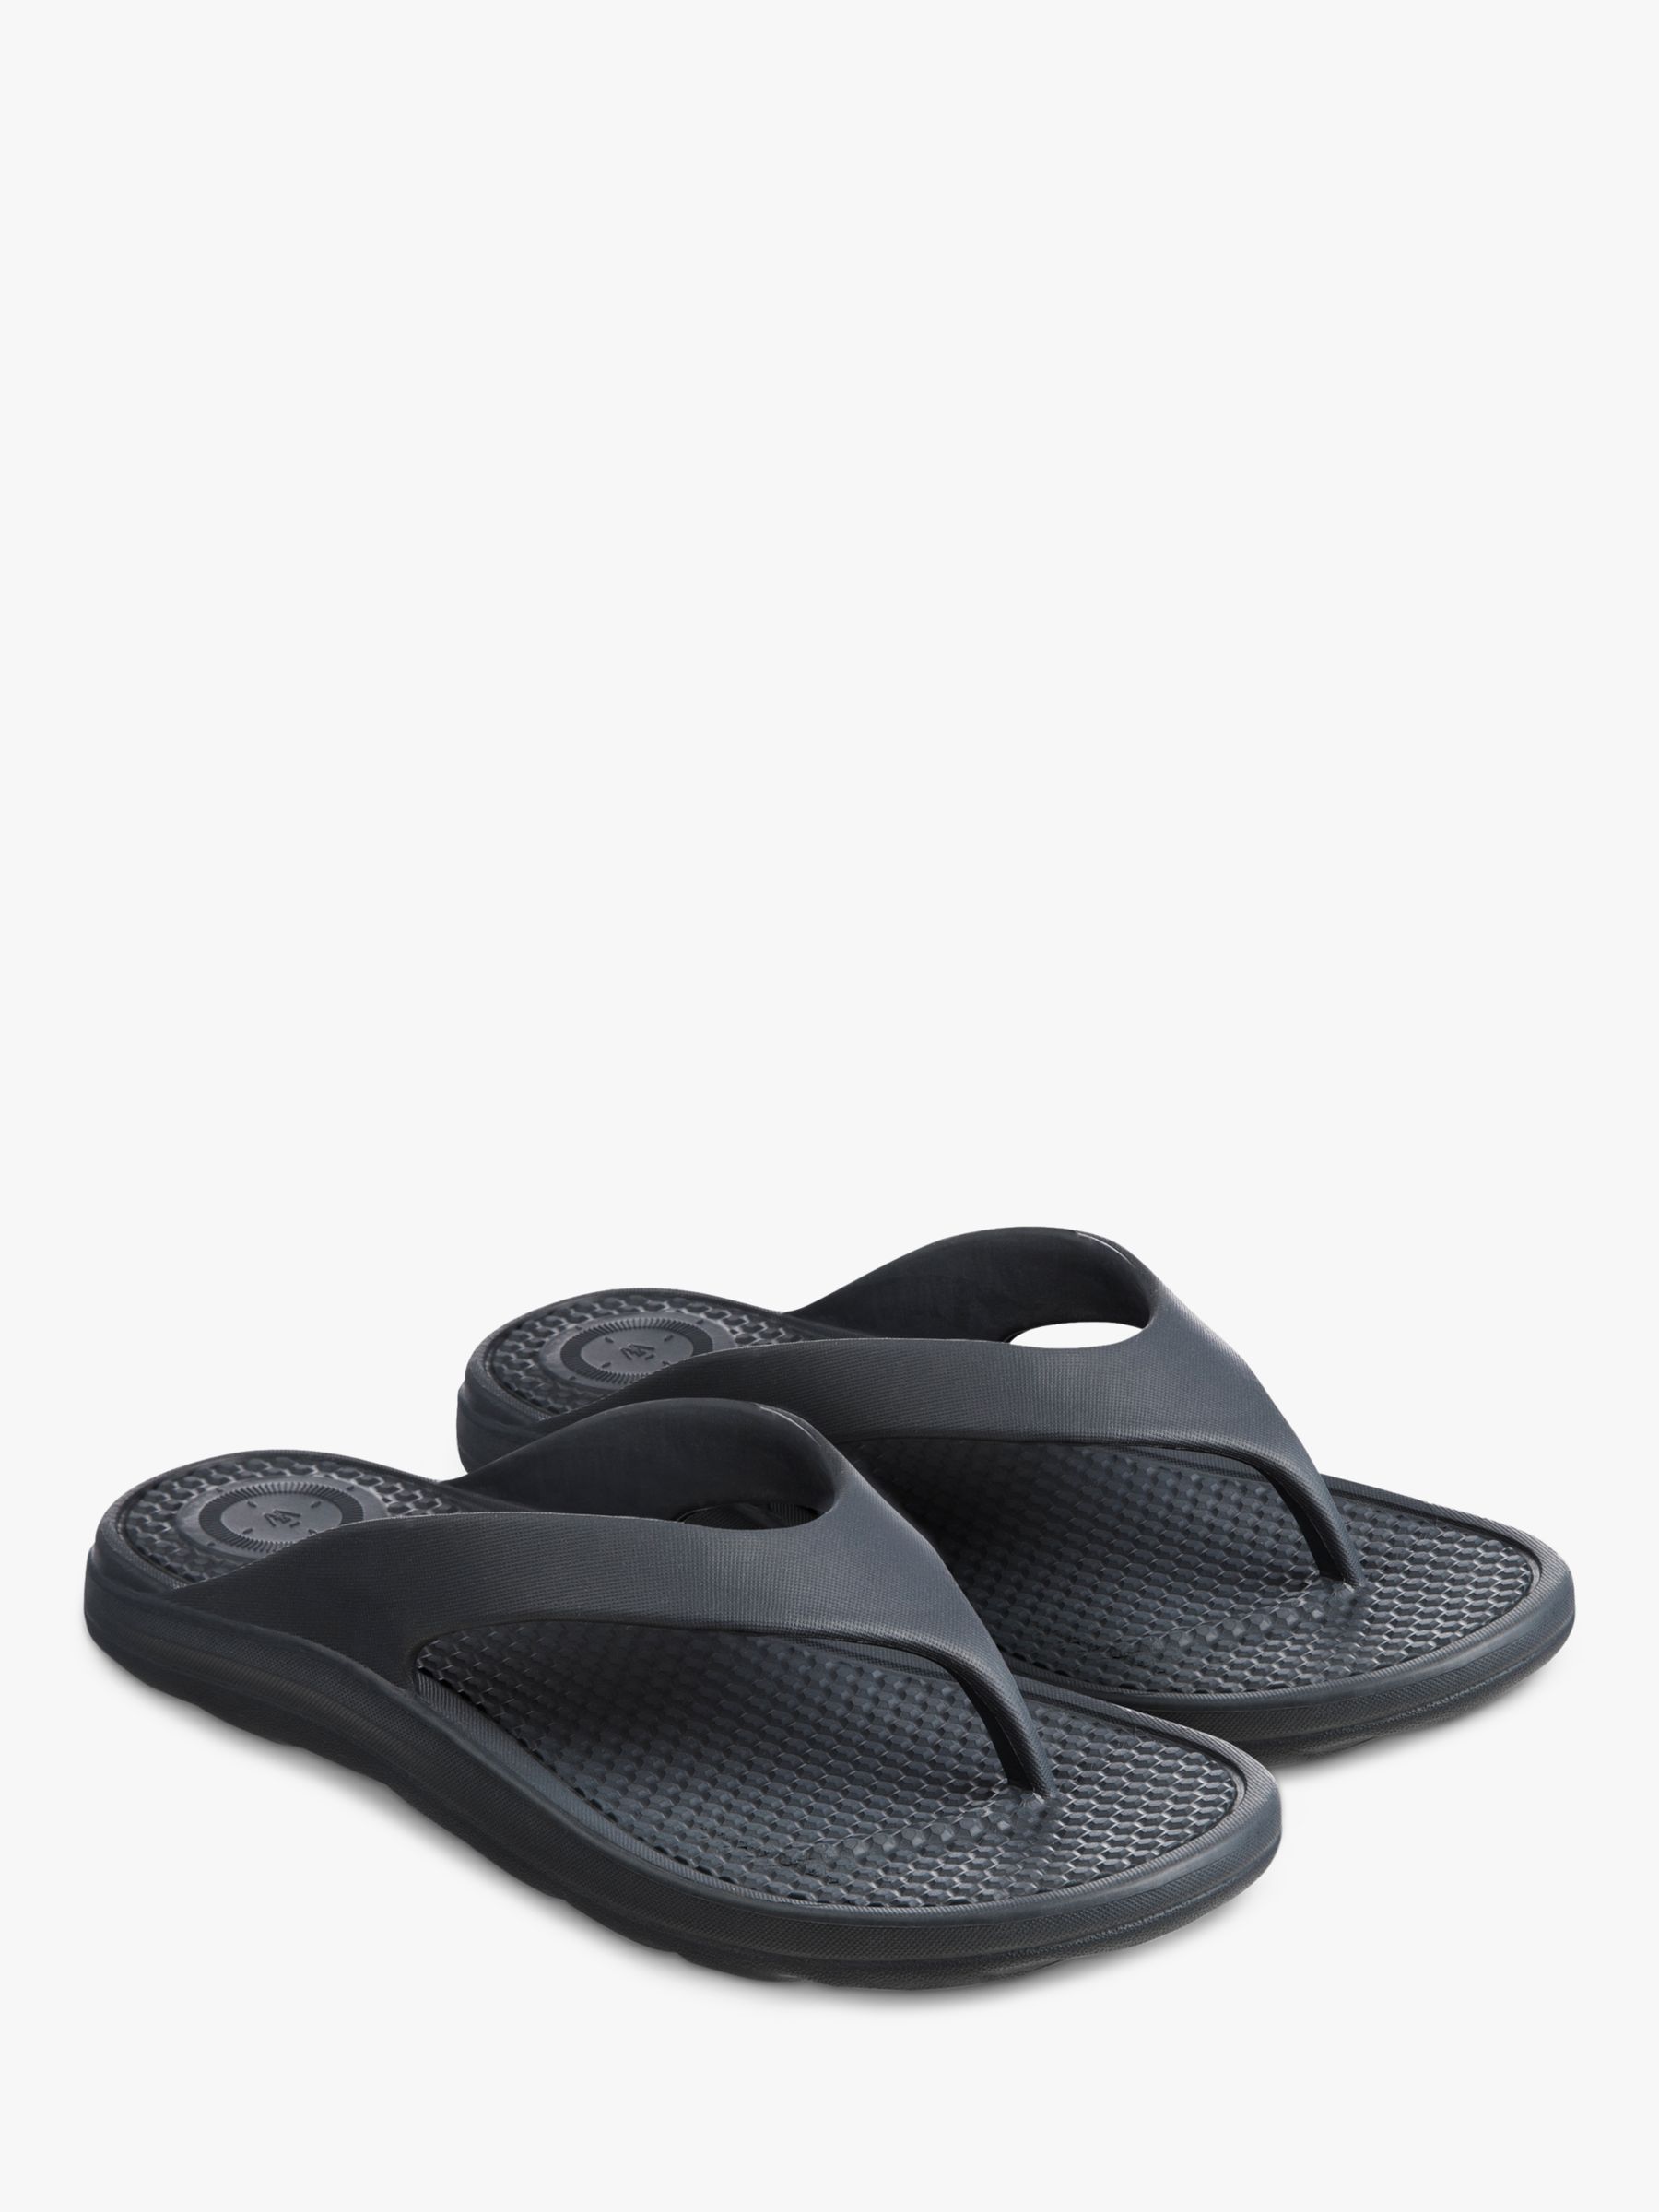 totes SOLBOUNCE Toe Post Sandals, Mineral at John Lewis & Partners